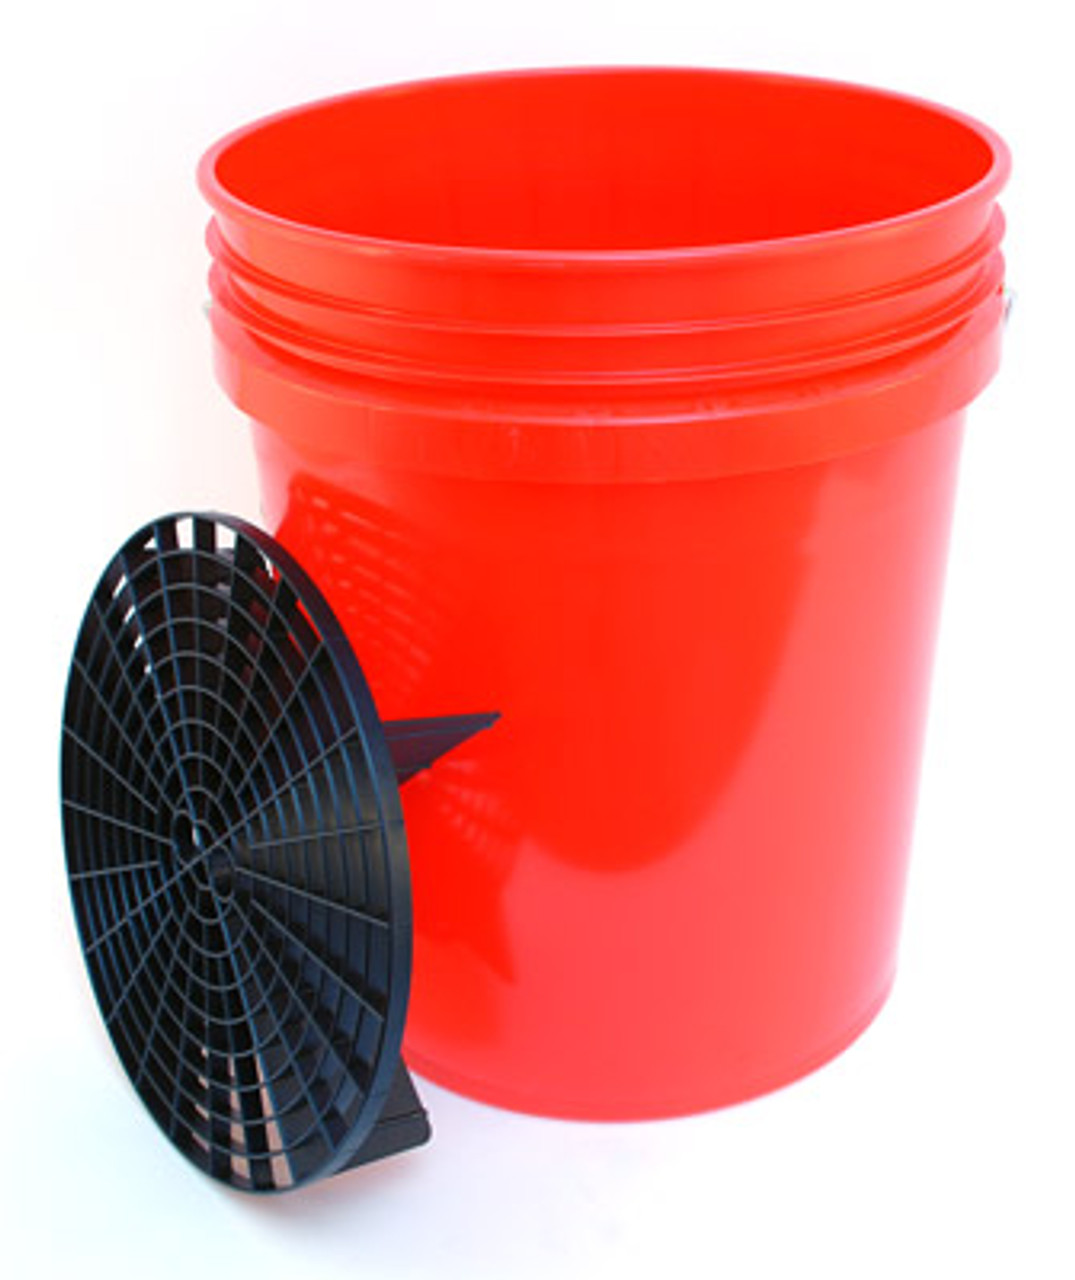 https://cdn11.bigcommerce.com/s-82c91564ki/images/stencil/1280x1280/products/8963/9538/5-gallon-professional-wash-bucket-with-grit-guard-red-24__92243.1684255302.jpg?c=1